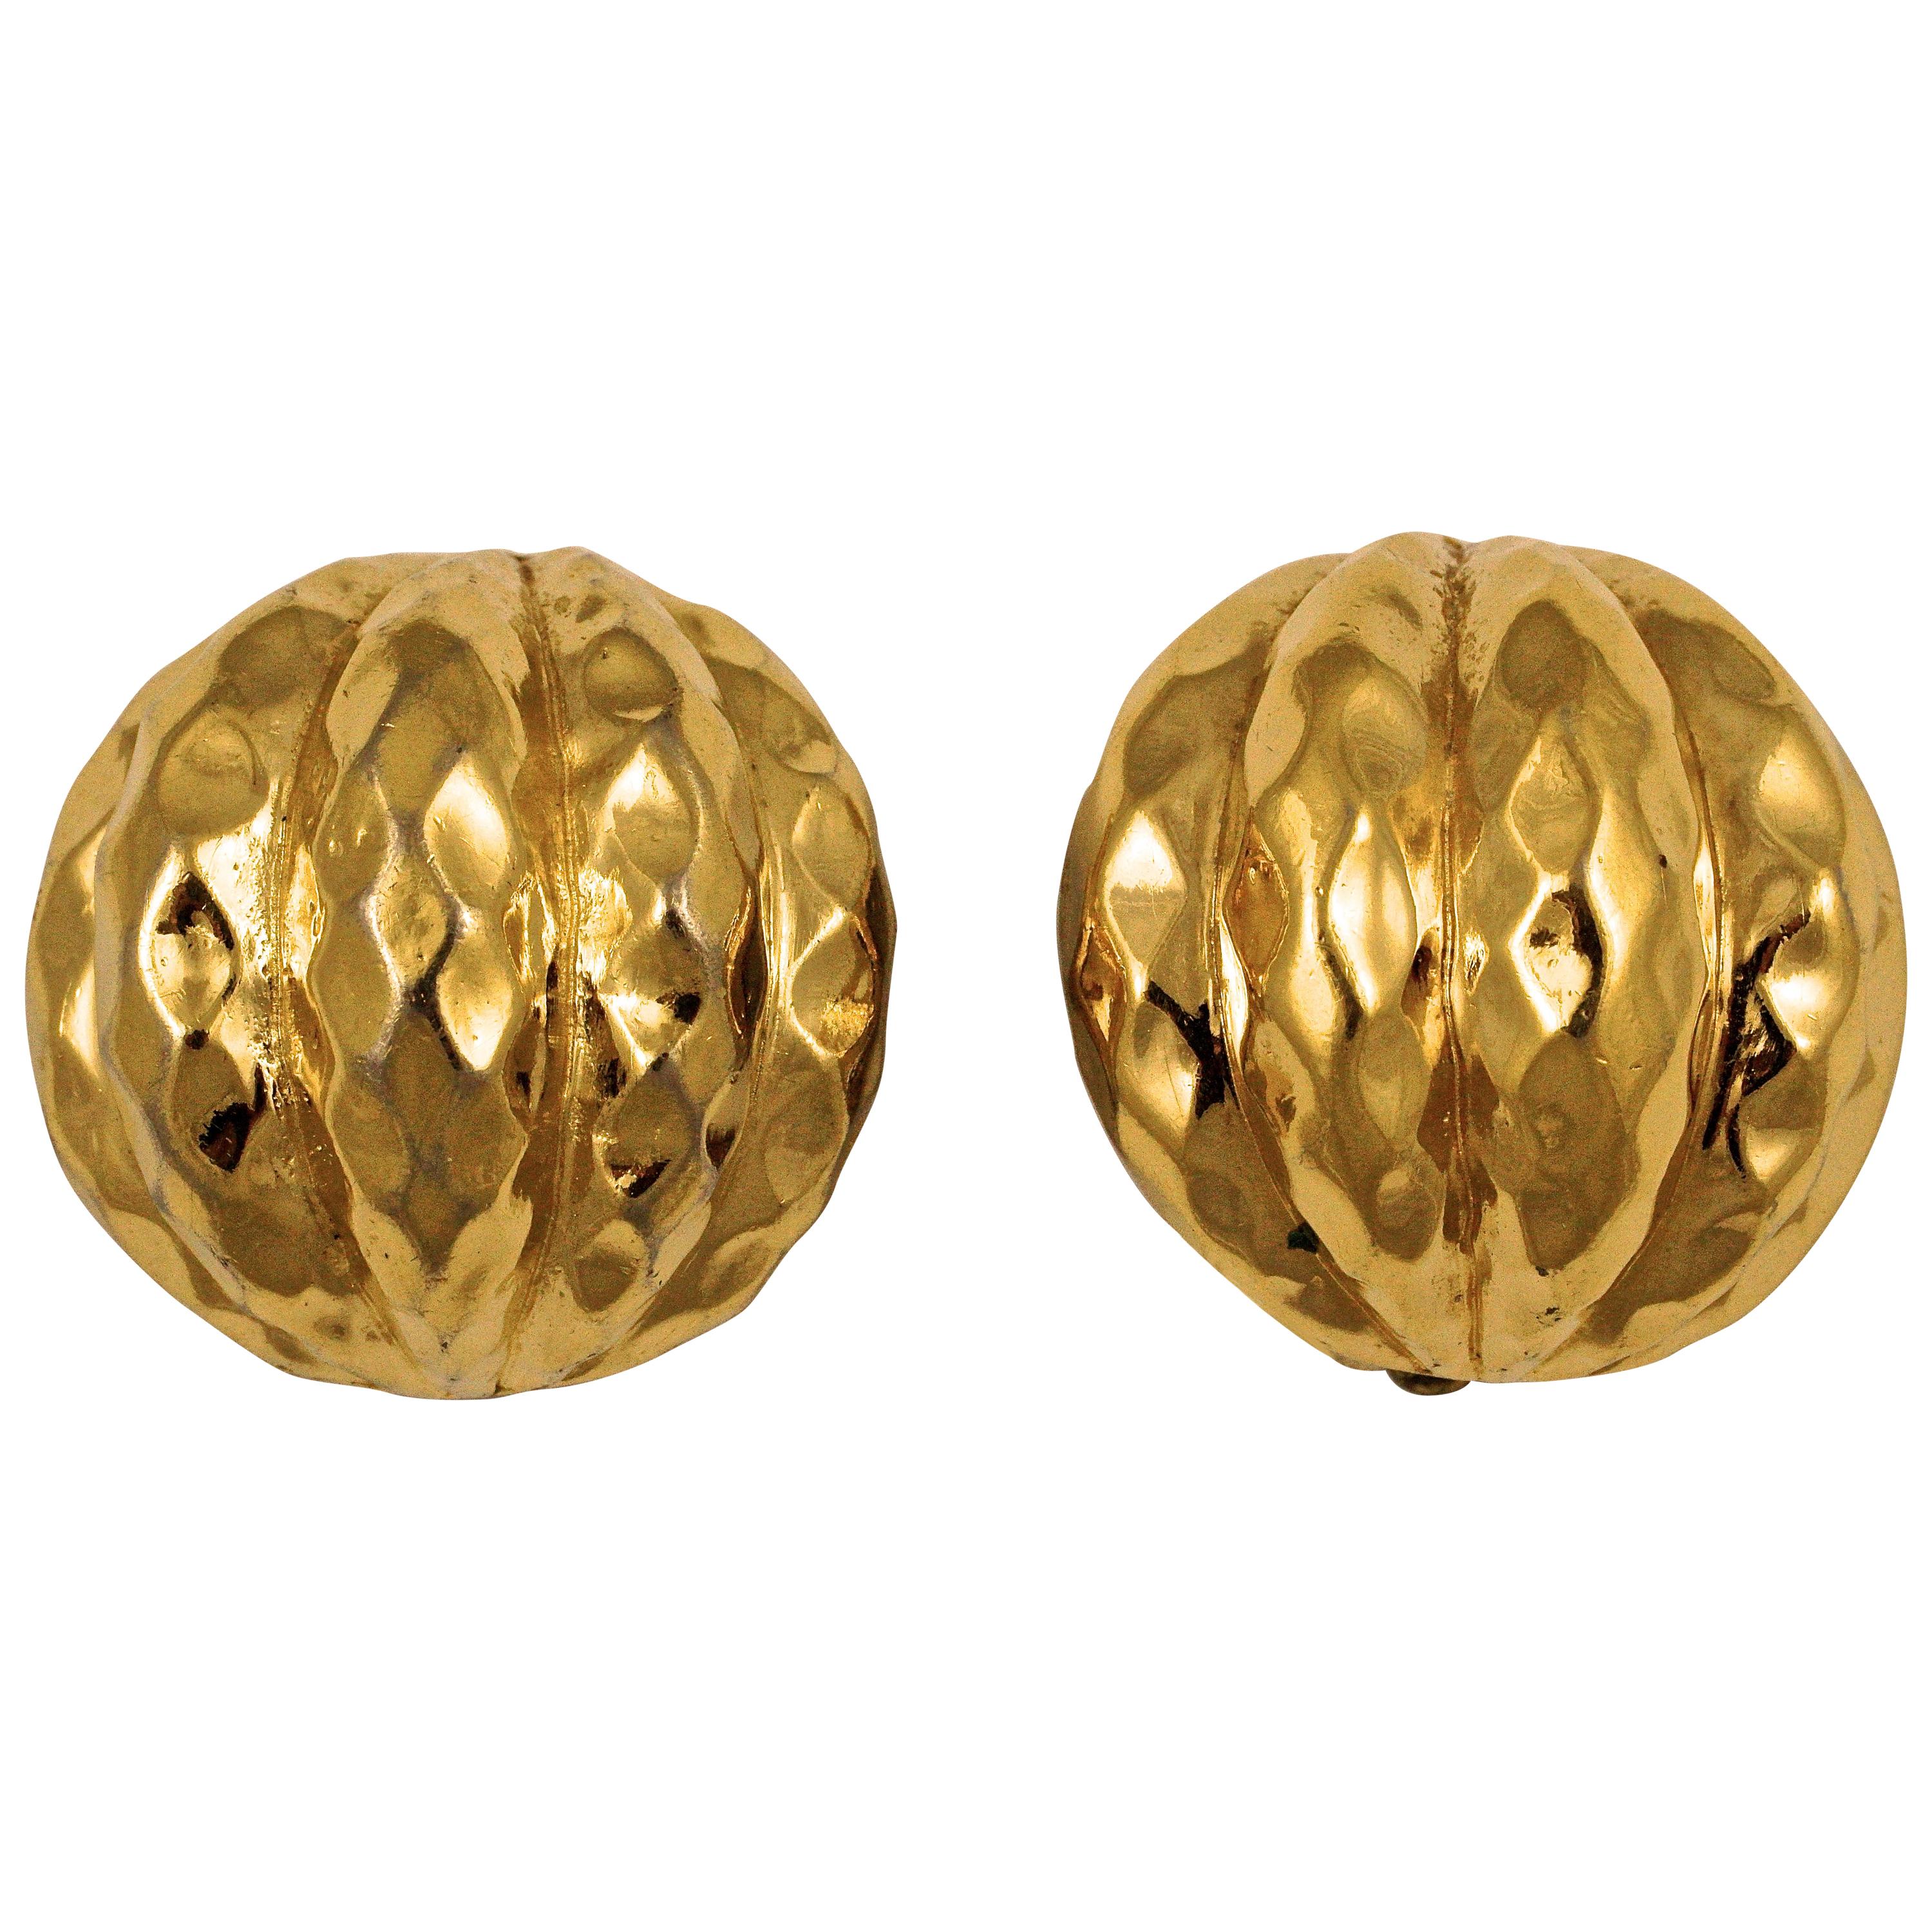 Ciner Gold Plated Domed Clip On Earrings with a Ridged and Patterned Design